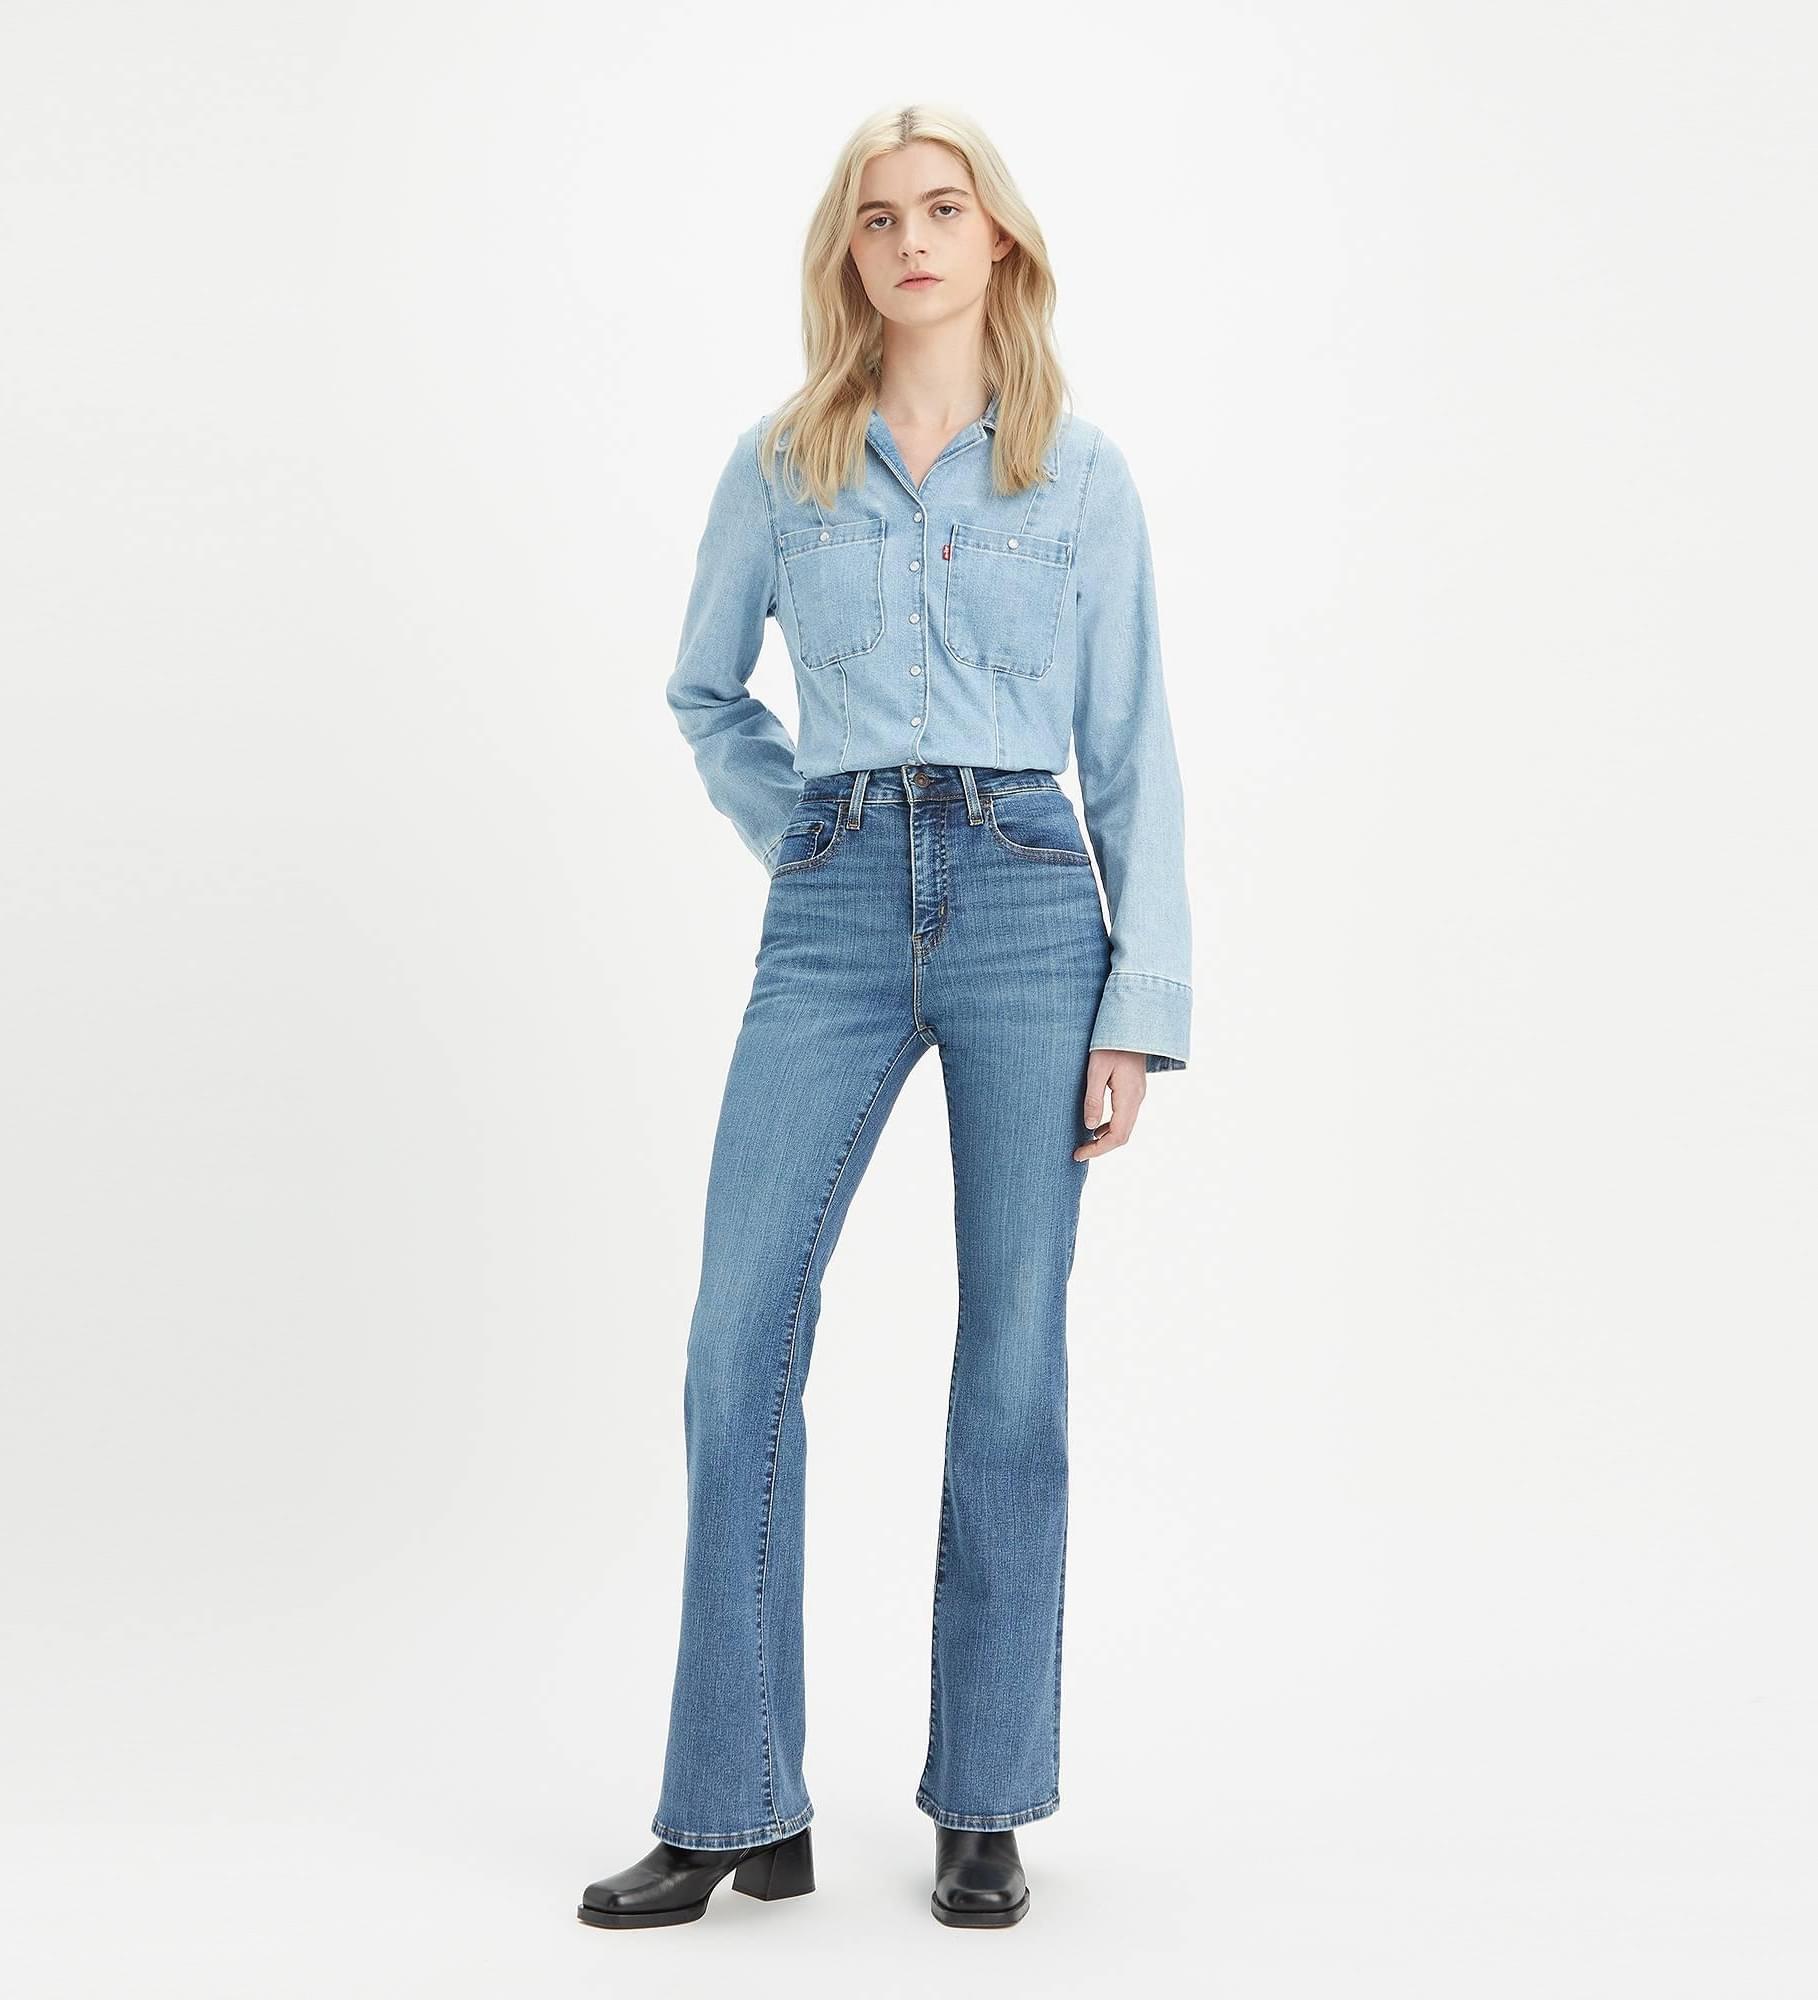 726™ High Rise Flare Jeans - Levi's Jeans, Jackets & Clothing